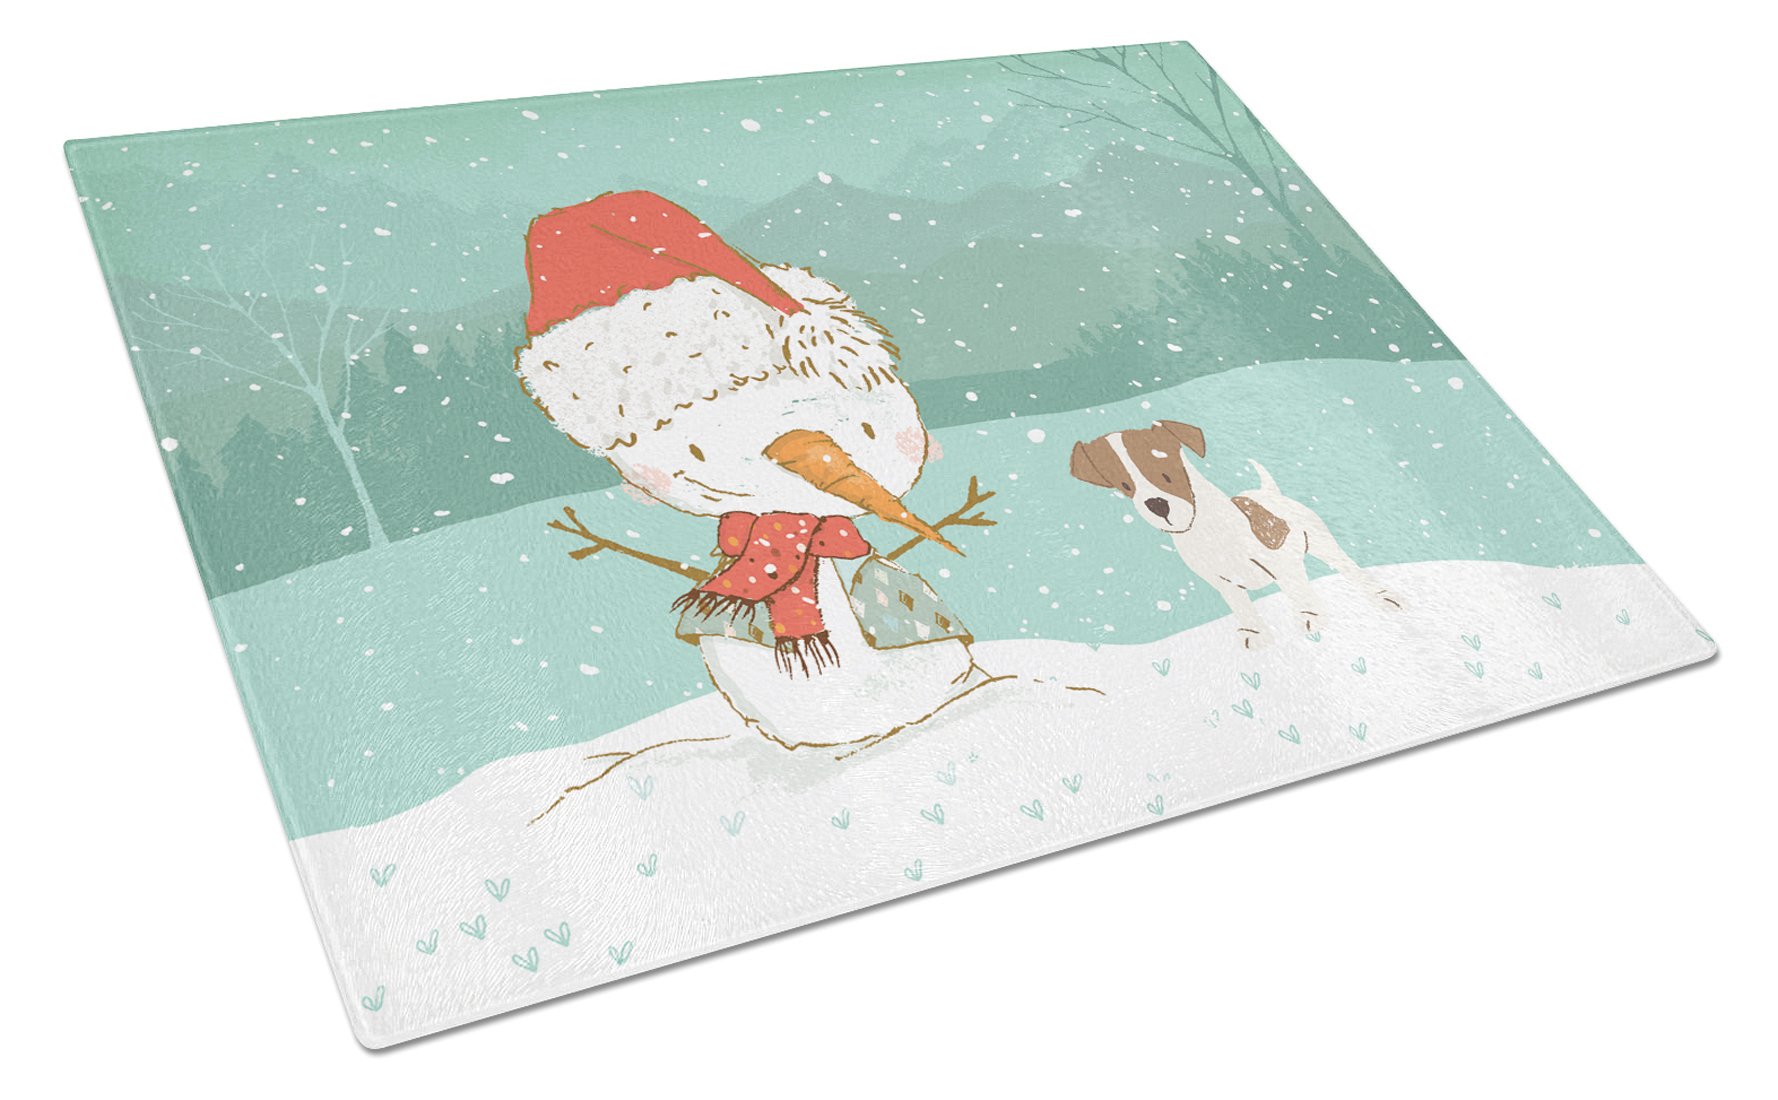 Jack Russell Terrier #2 Snowman Christmas Glass Cutting Board Large CK2091LCB by Caroline's Treasures